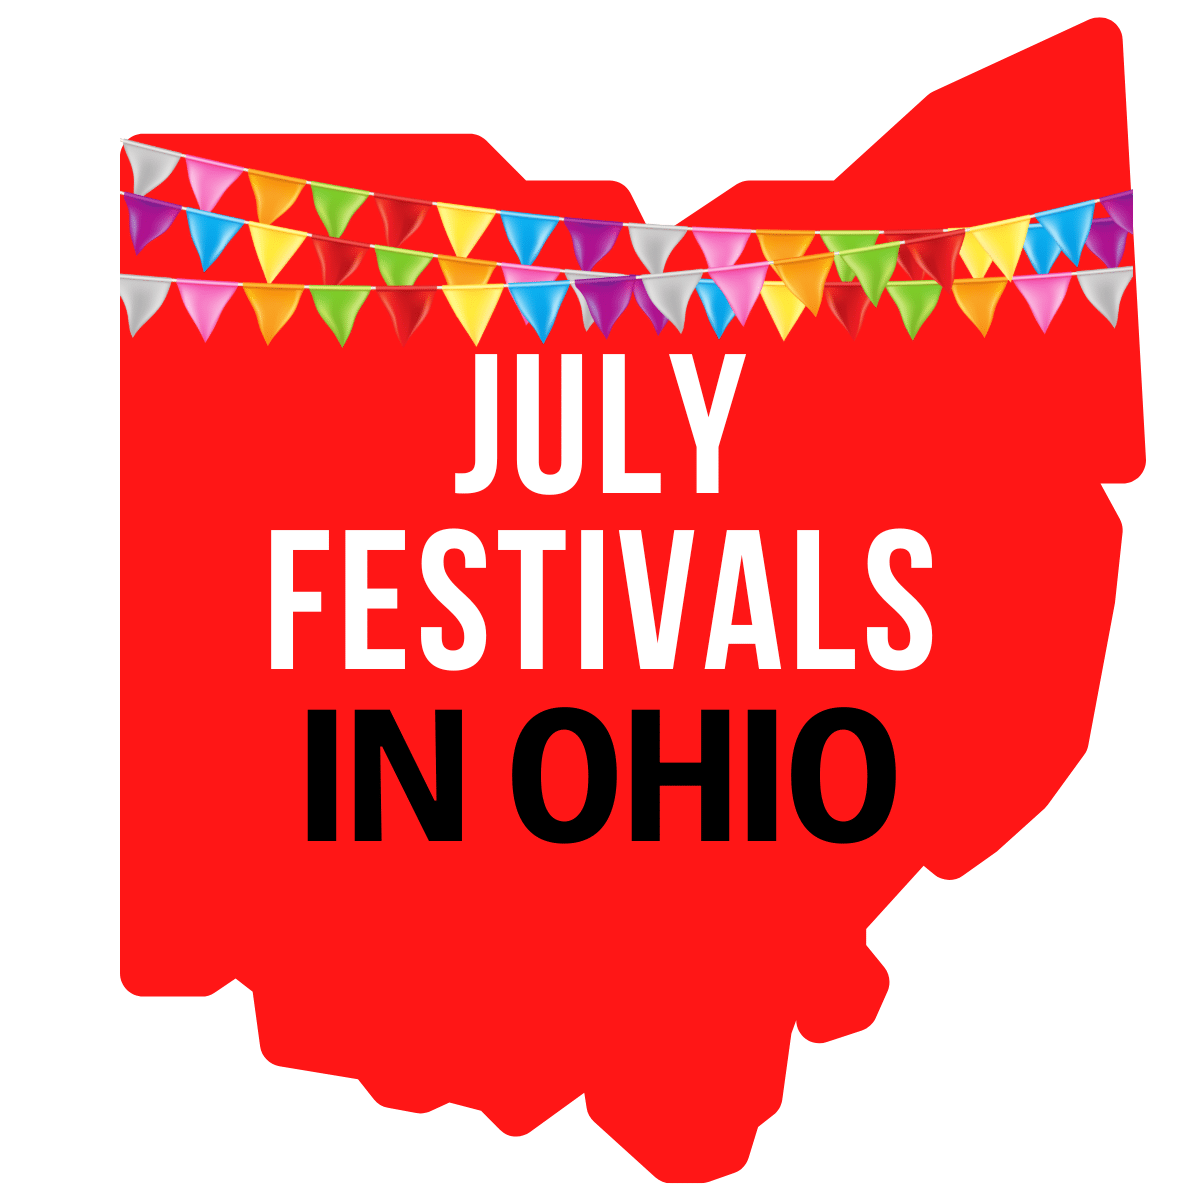 A square image of a red print of Ohio with colorful flags strung across it. It has text July Festivals in Ohio in white and black letters.